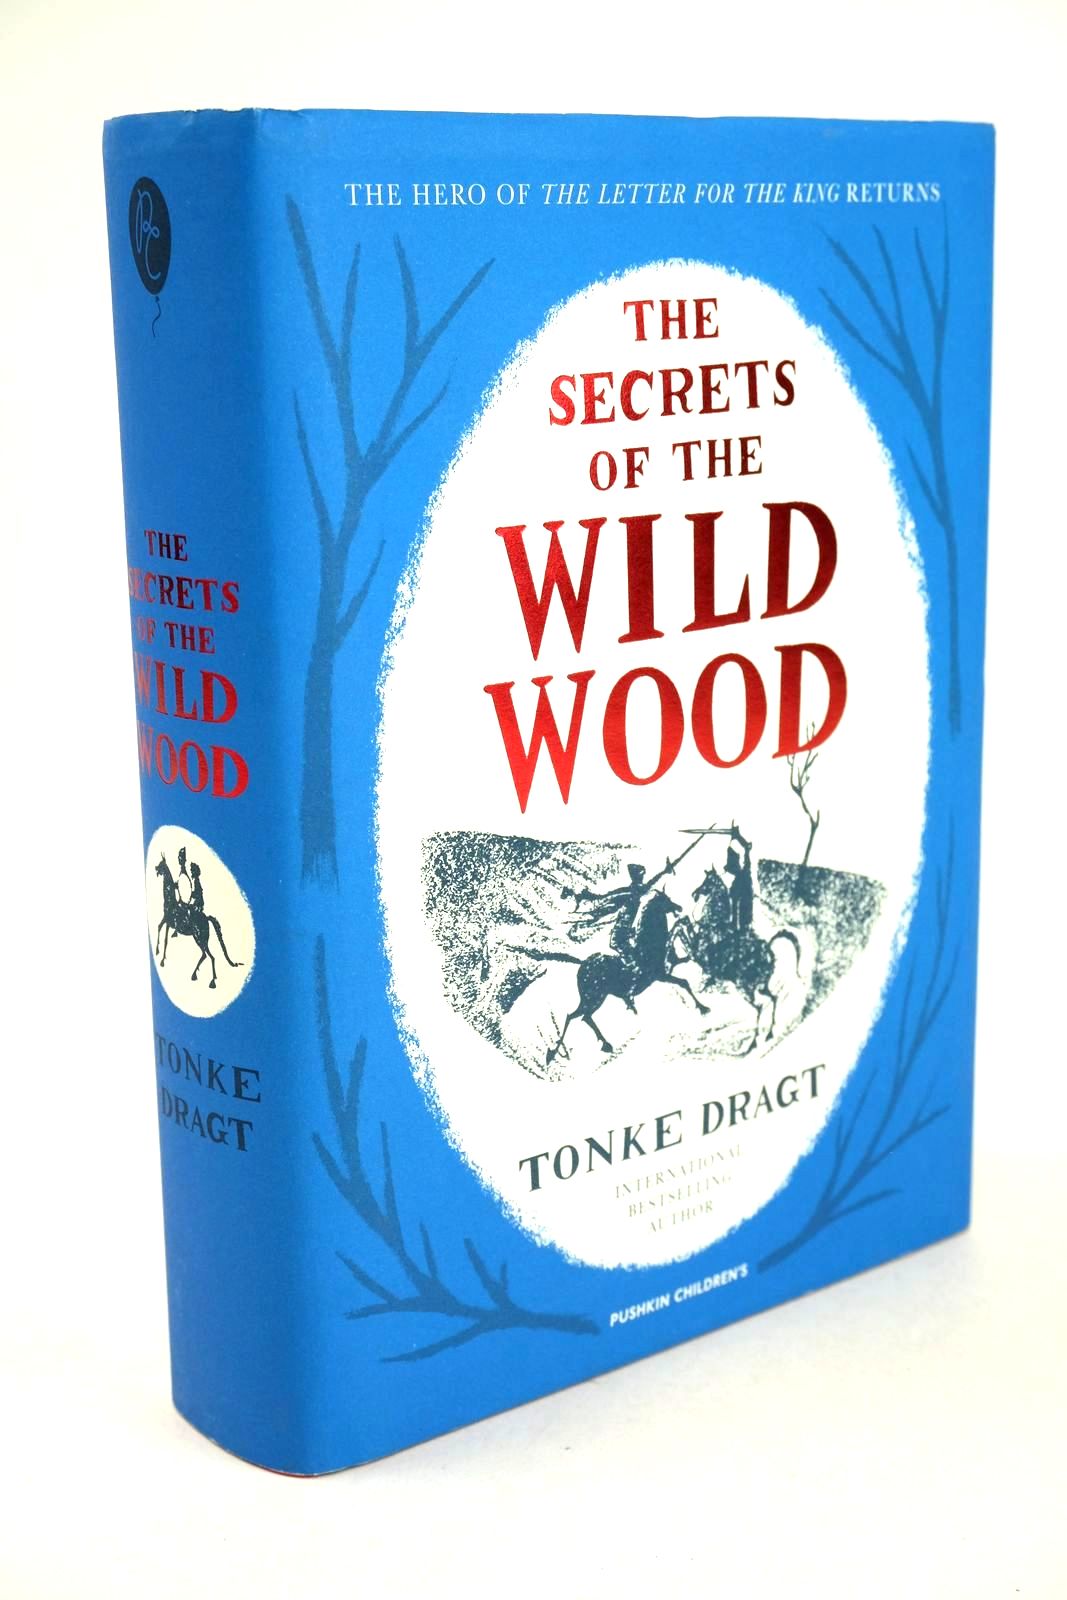 Photo of THE SECRETS OF THE WILD WOOD written by Dragt, Tonke illustrated by Dragt, Tonke published by Pushkin Children's Books (STOCK CODE: 1326460)  for sale by Stella & Rose's Books